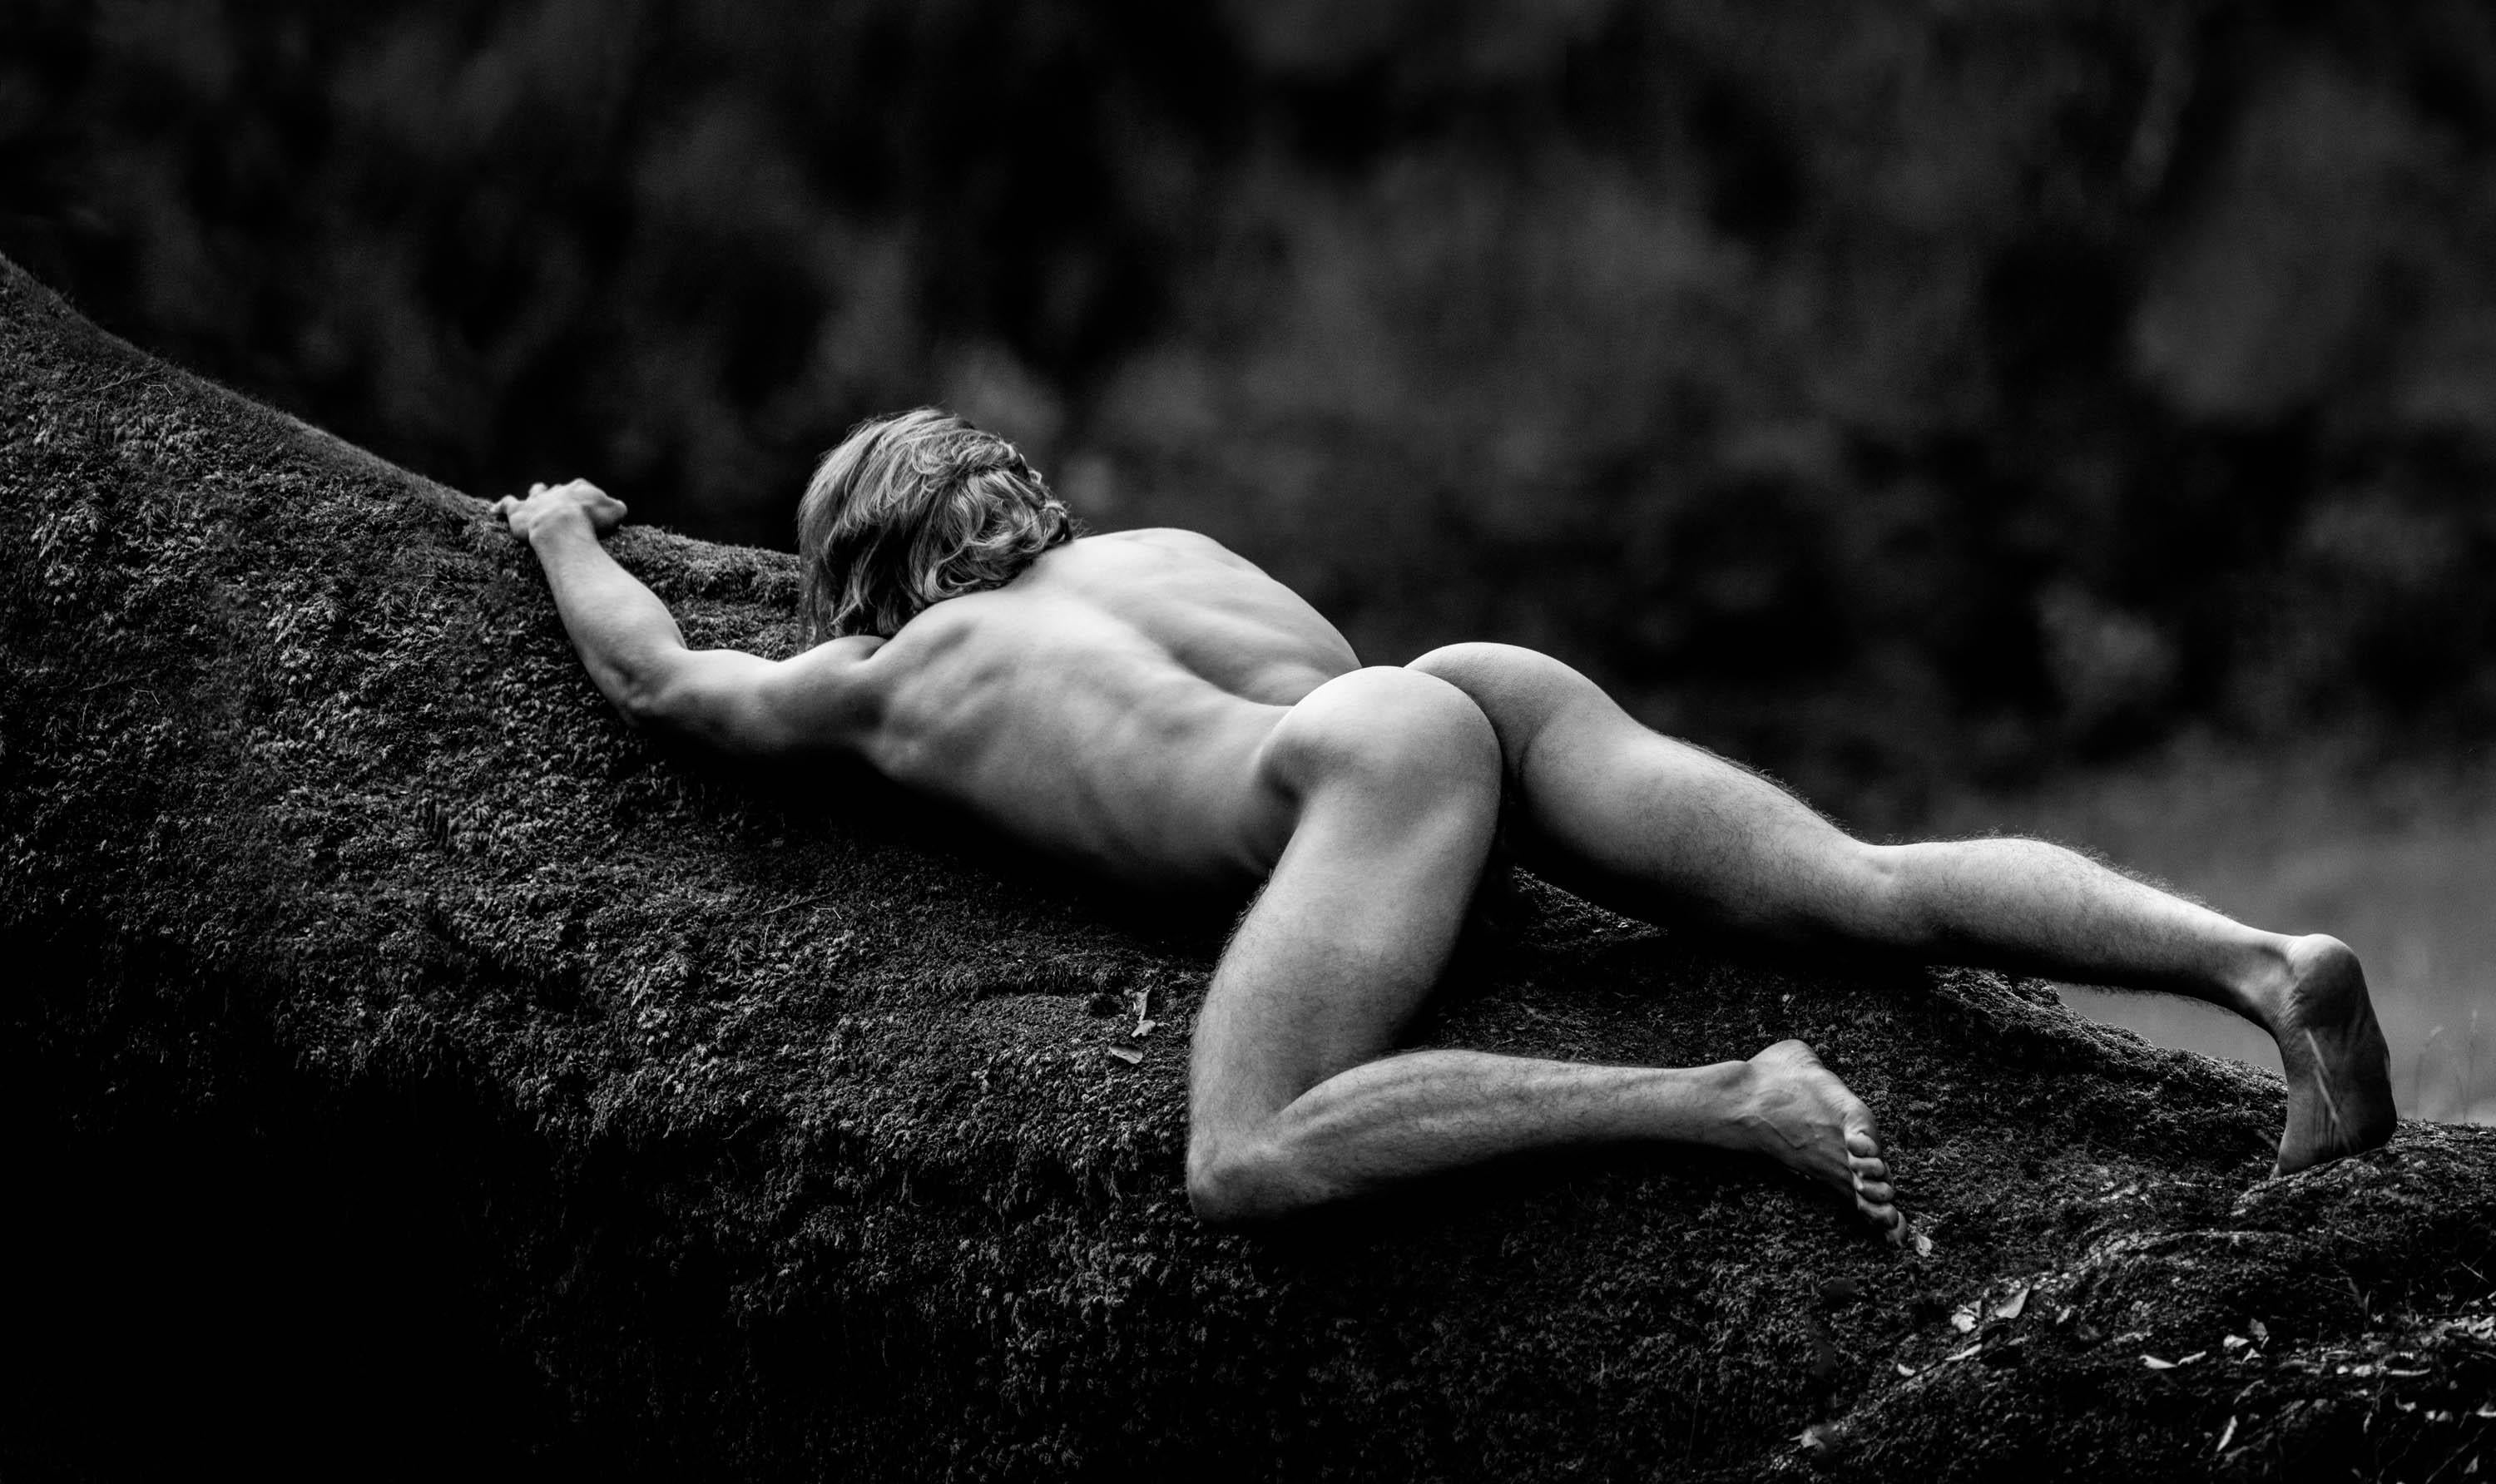 Celebrity Nude Photography - 23 For Sale on 1stDibs.